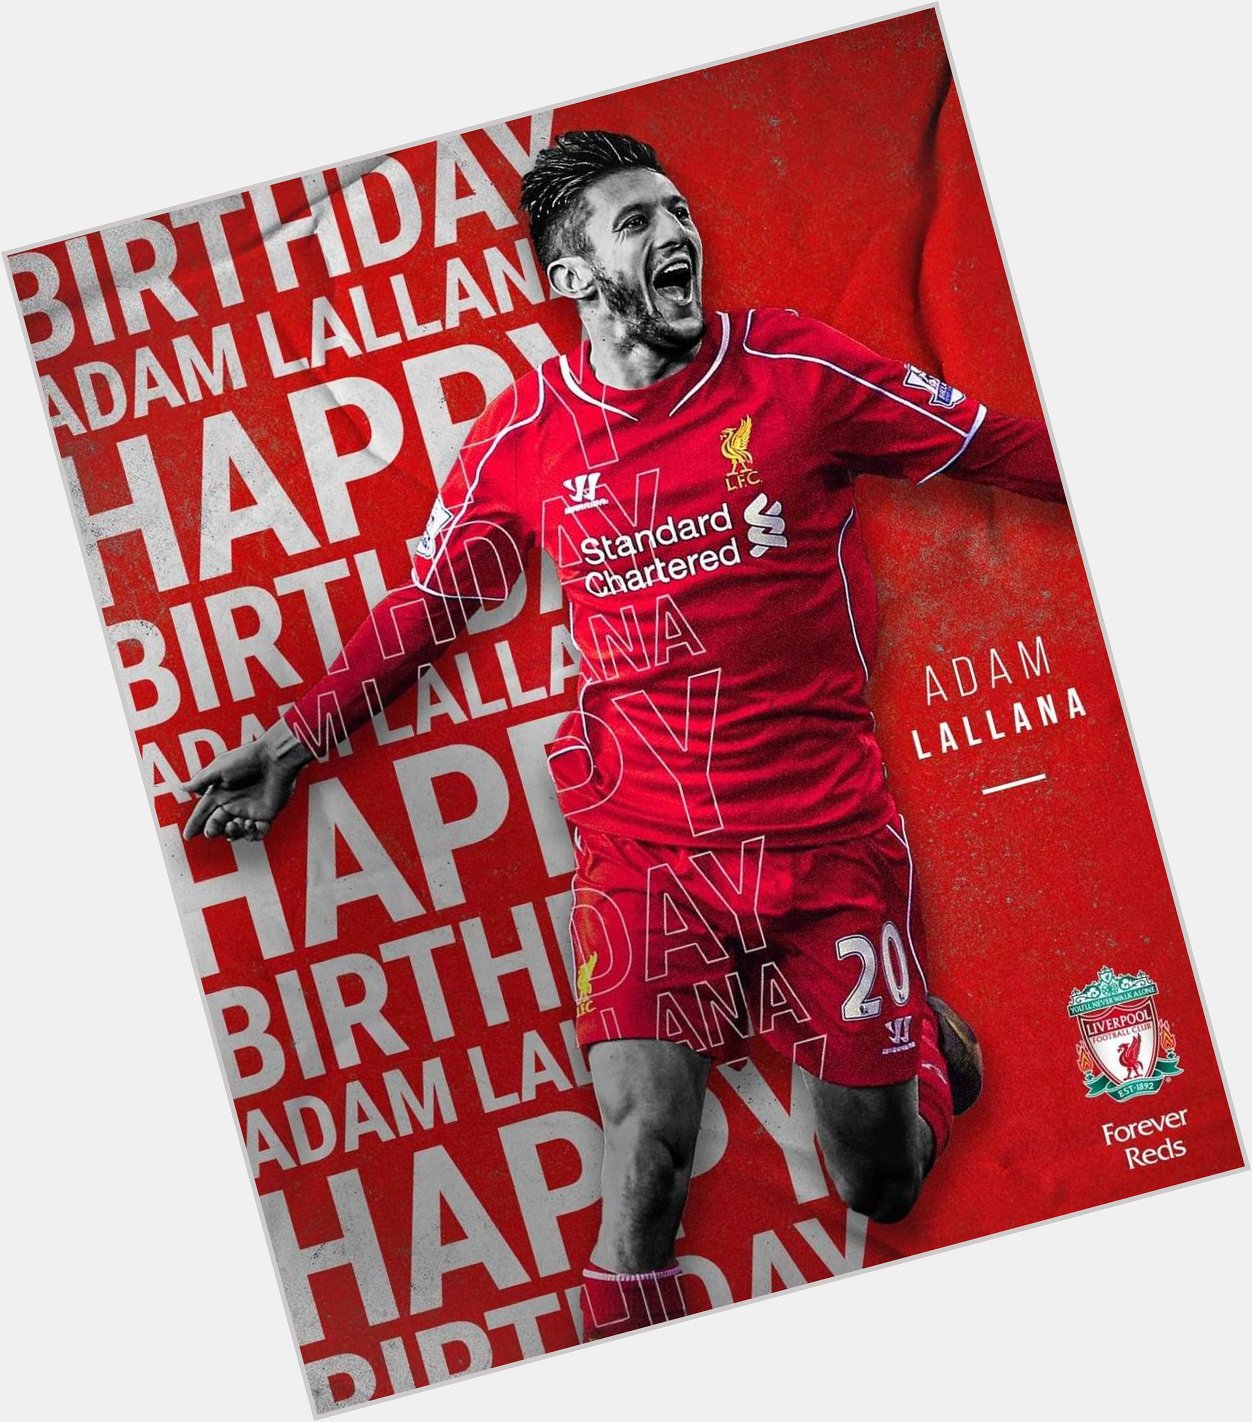 Happy Birthday to one of our former Champion Adam Lallana   Have a great day mate 